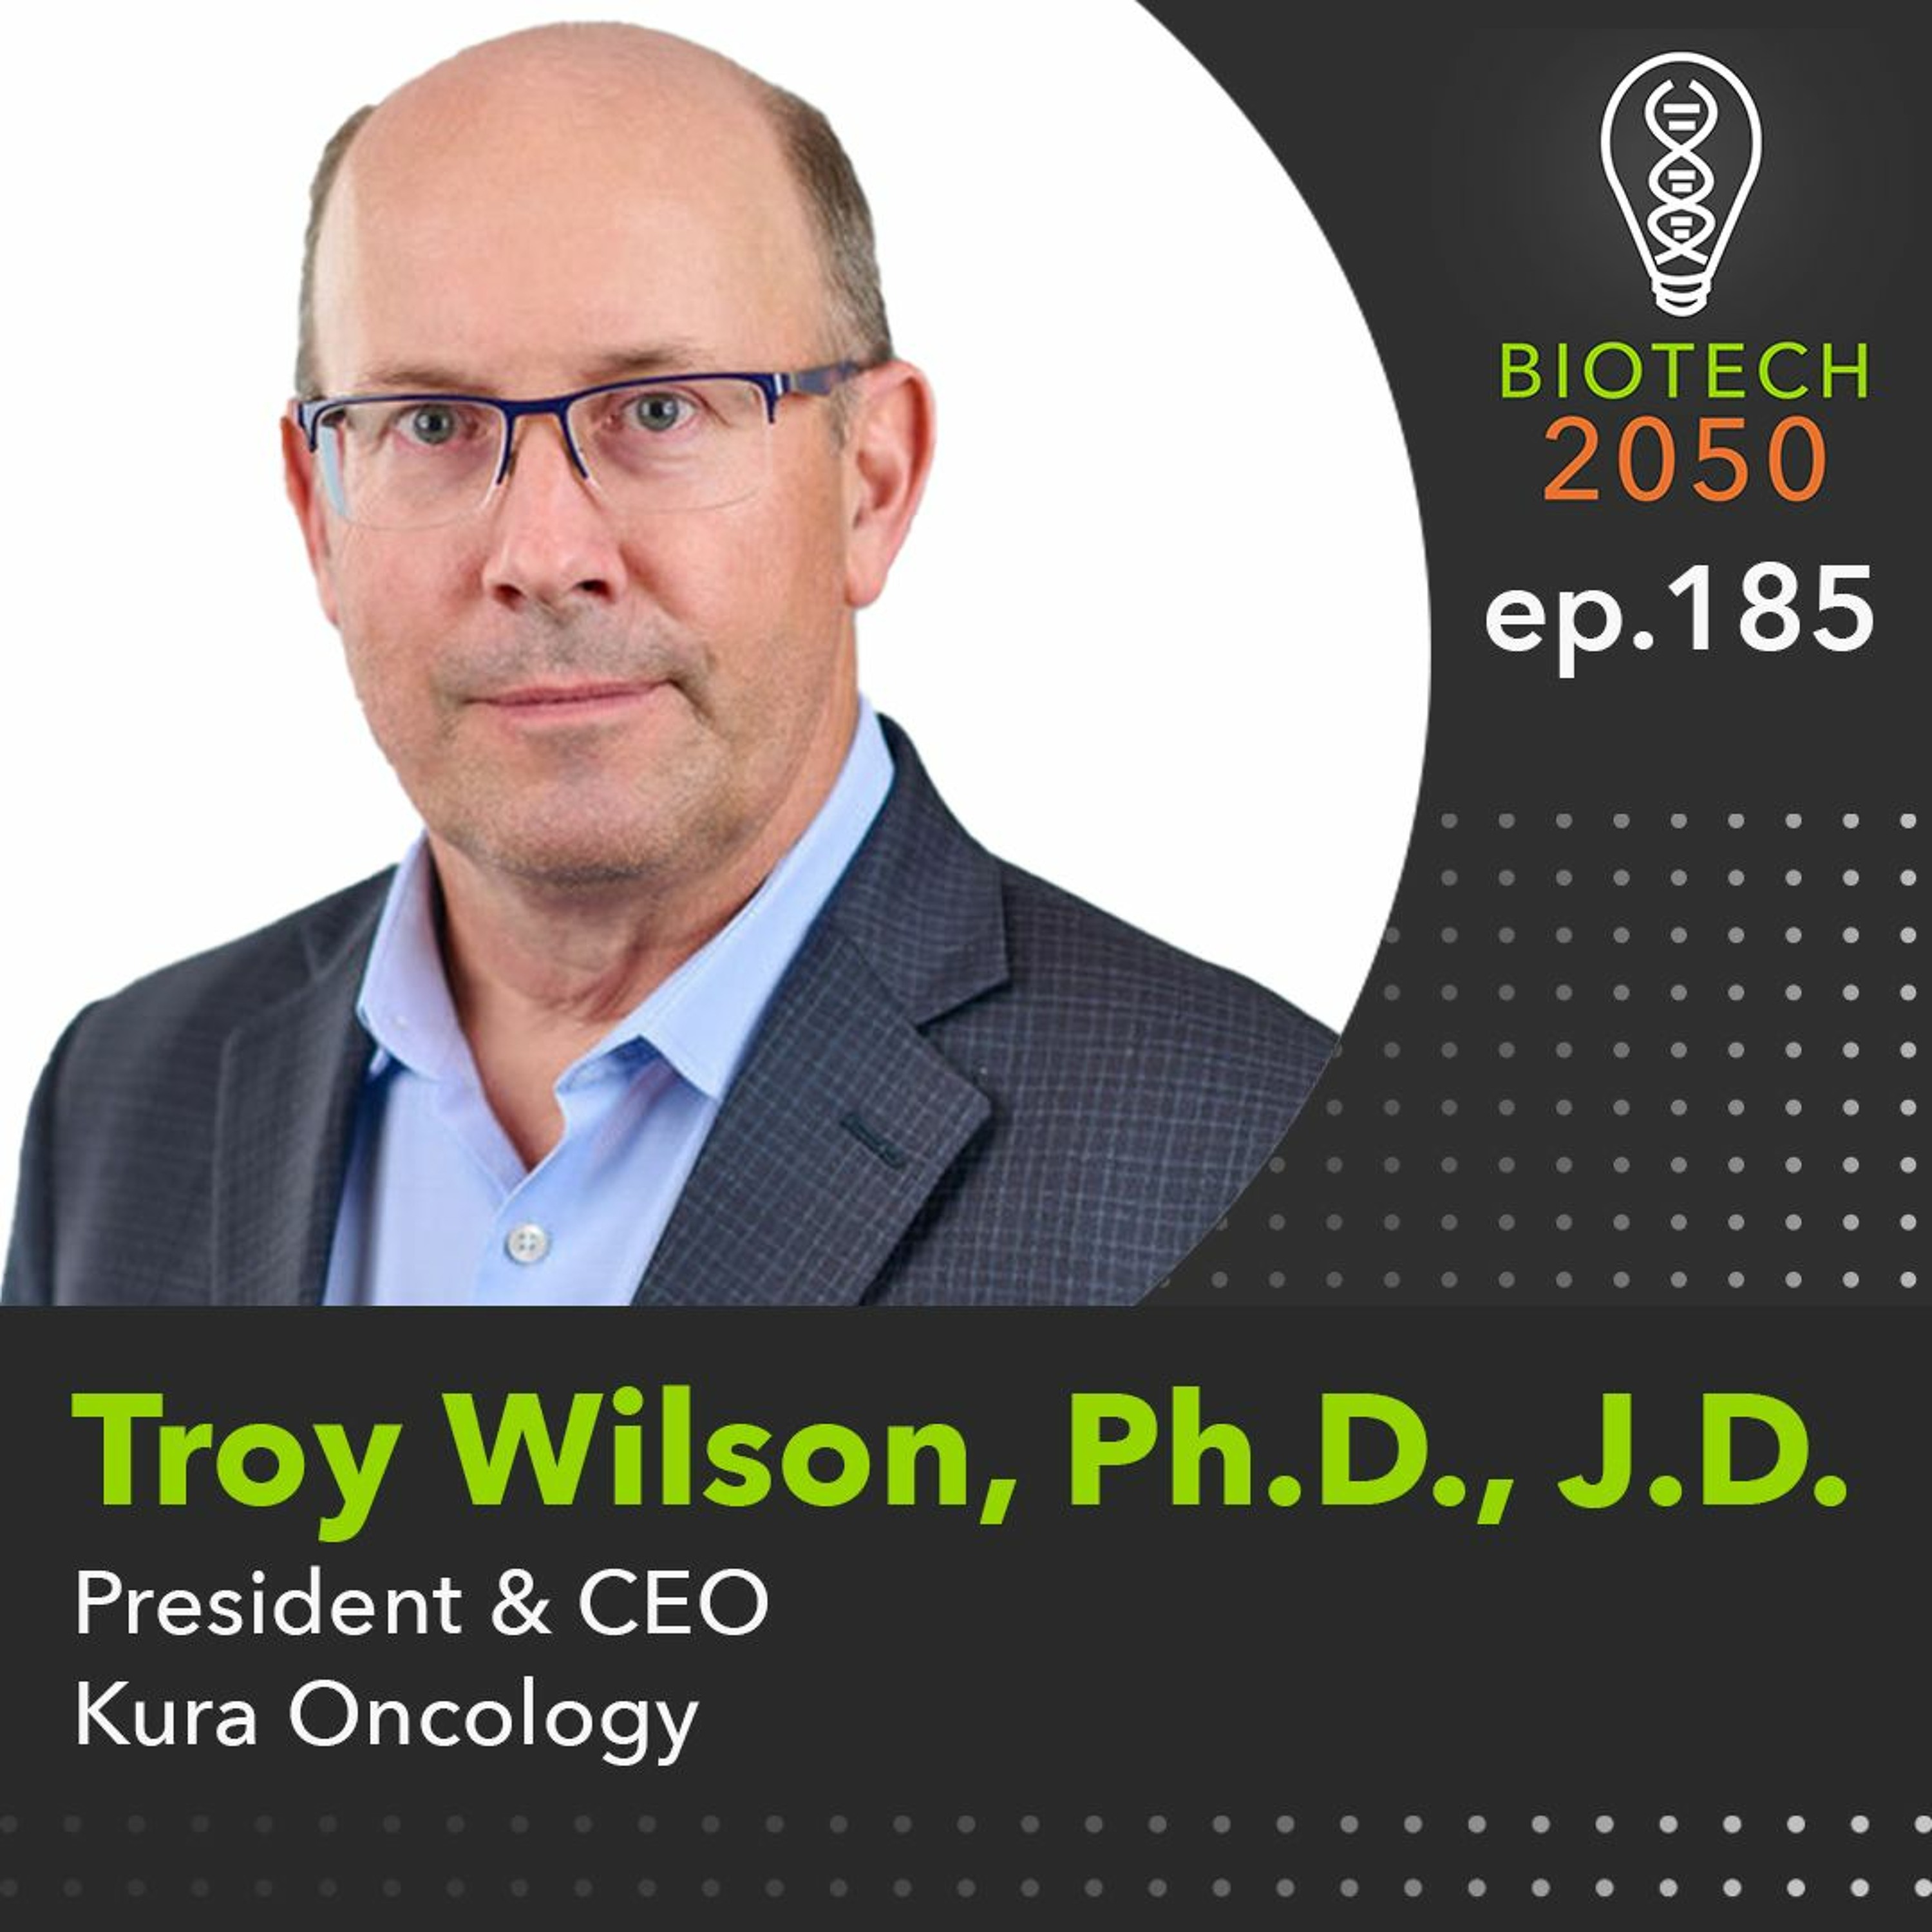 The promise of precision oncology, Troy Wilson, President & CEO, Kura Oncology